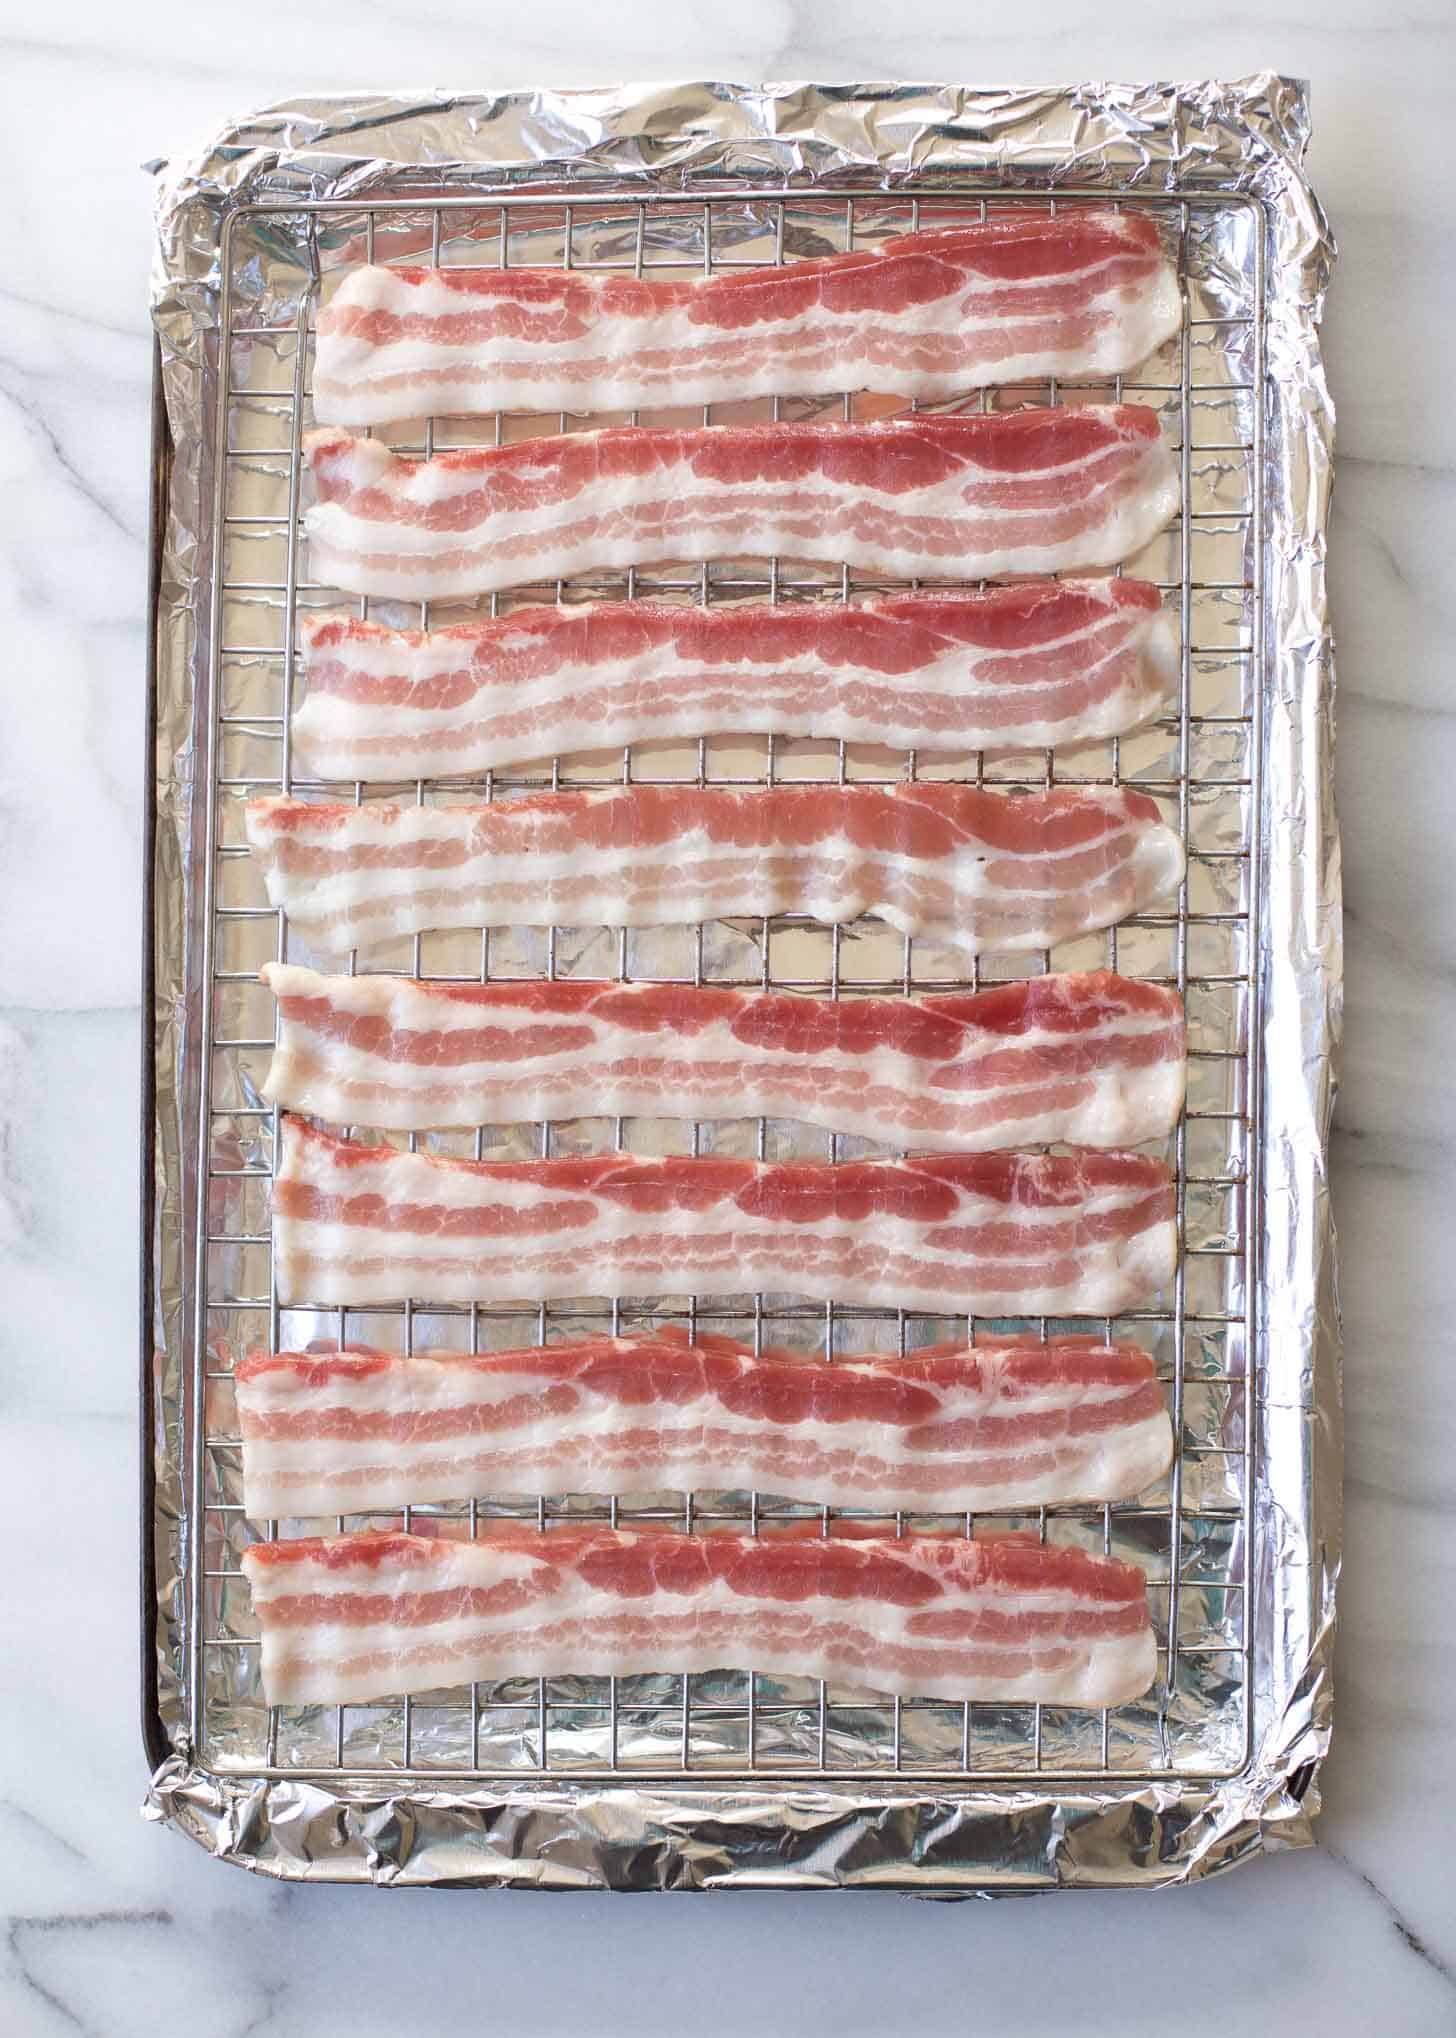 uncooked bacon on a wire rack